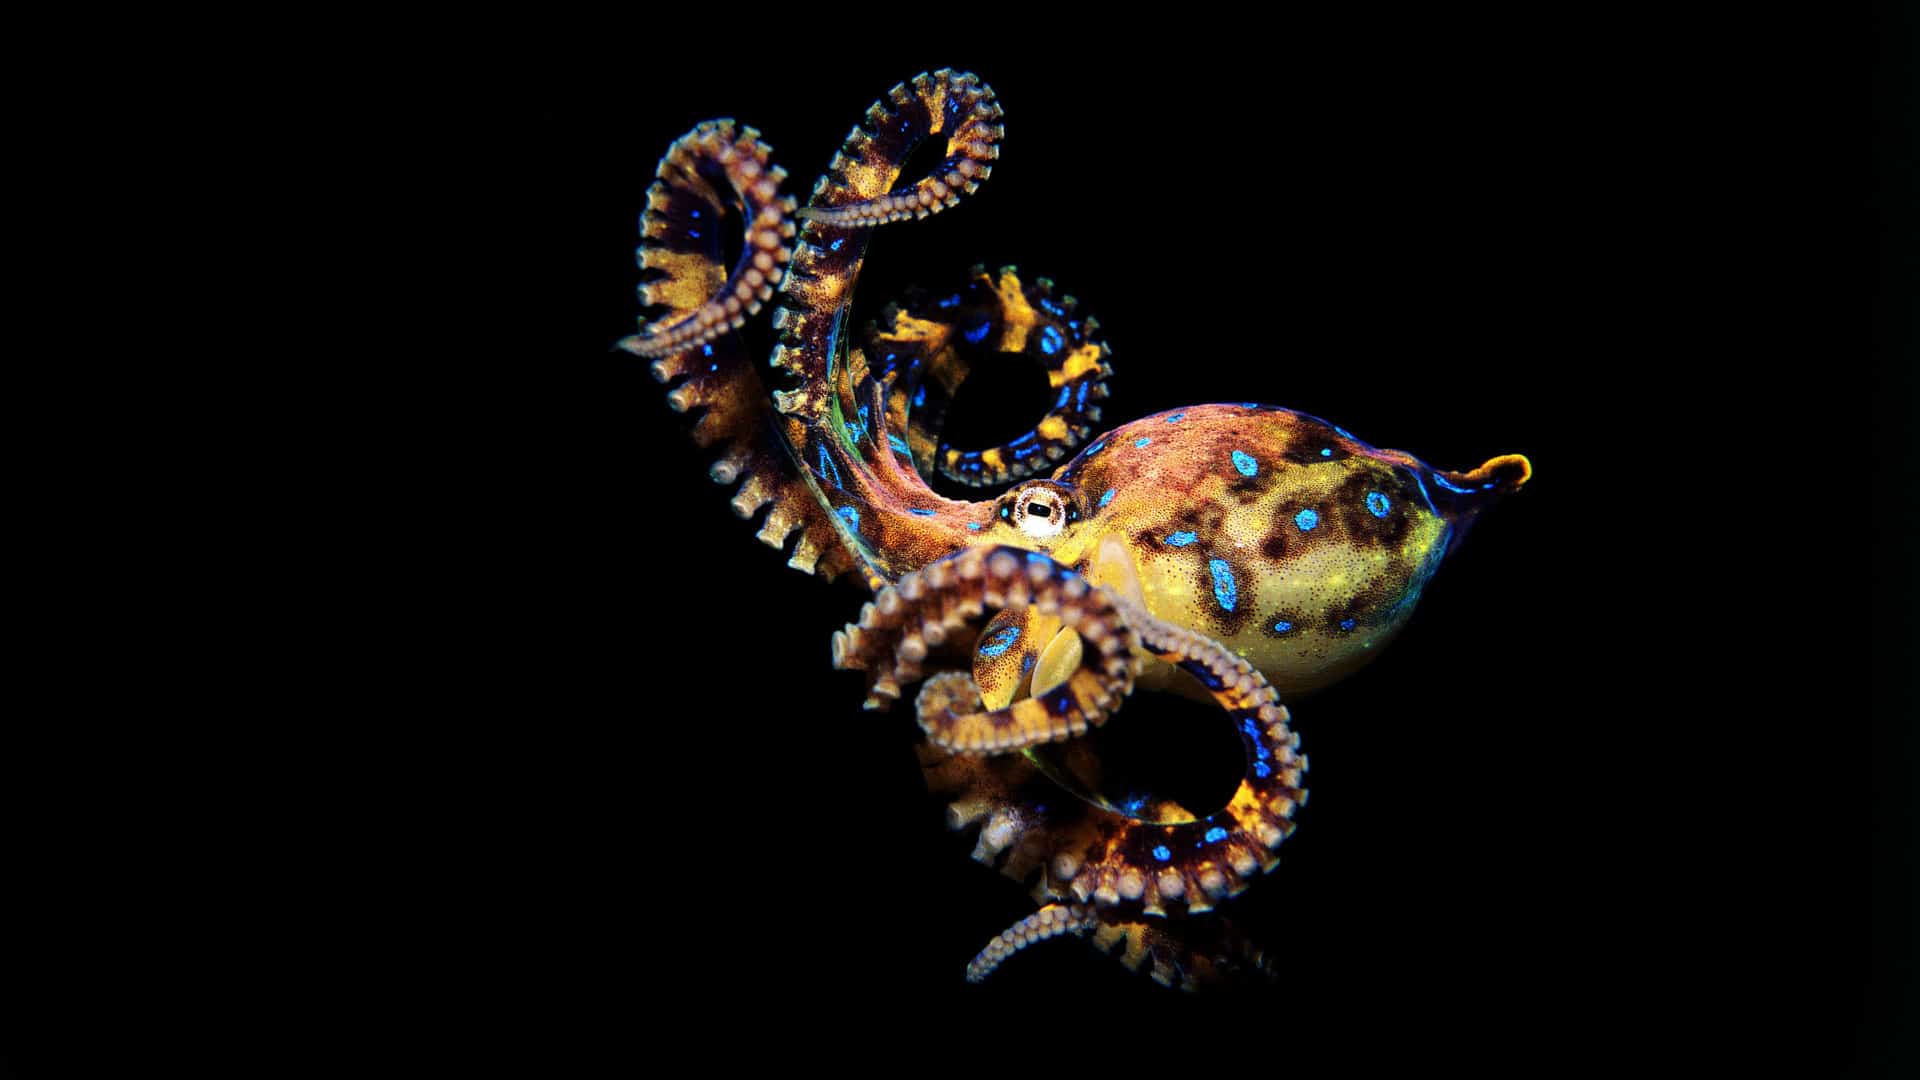  Where Do Blue Ringed Octopus Live